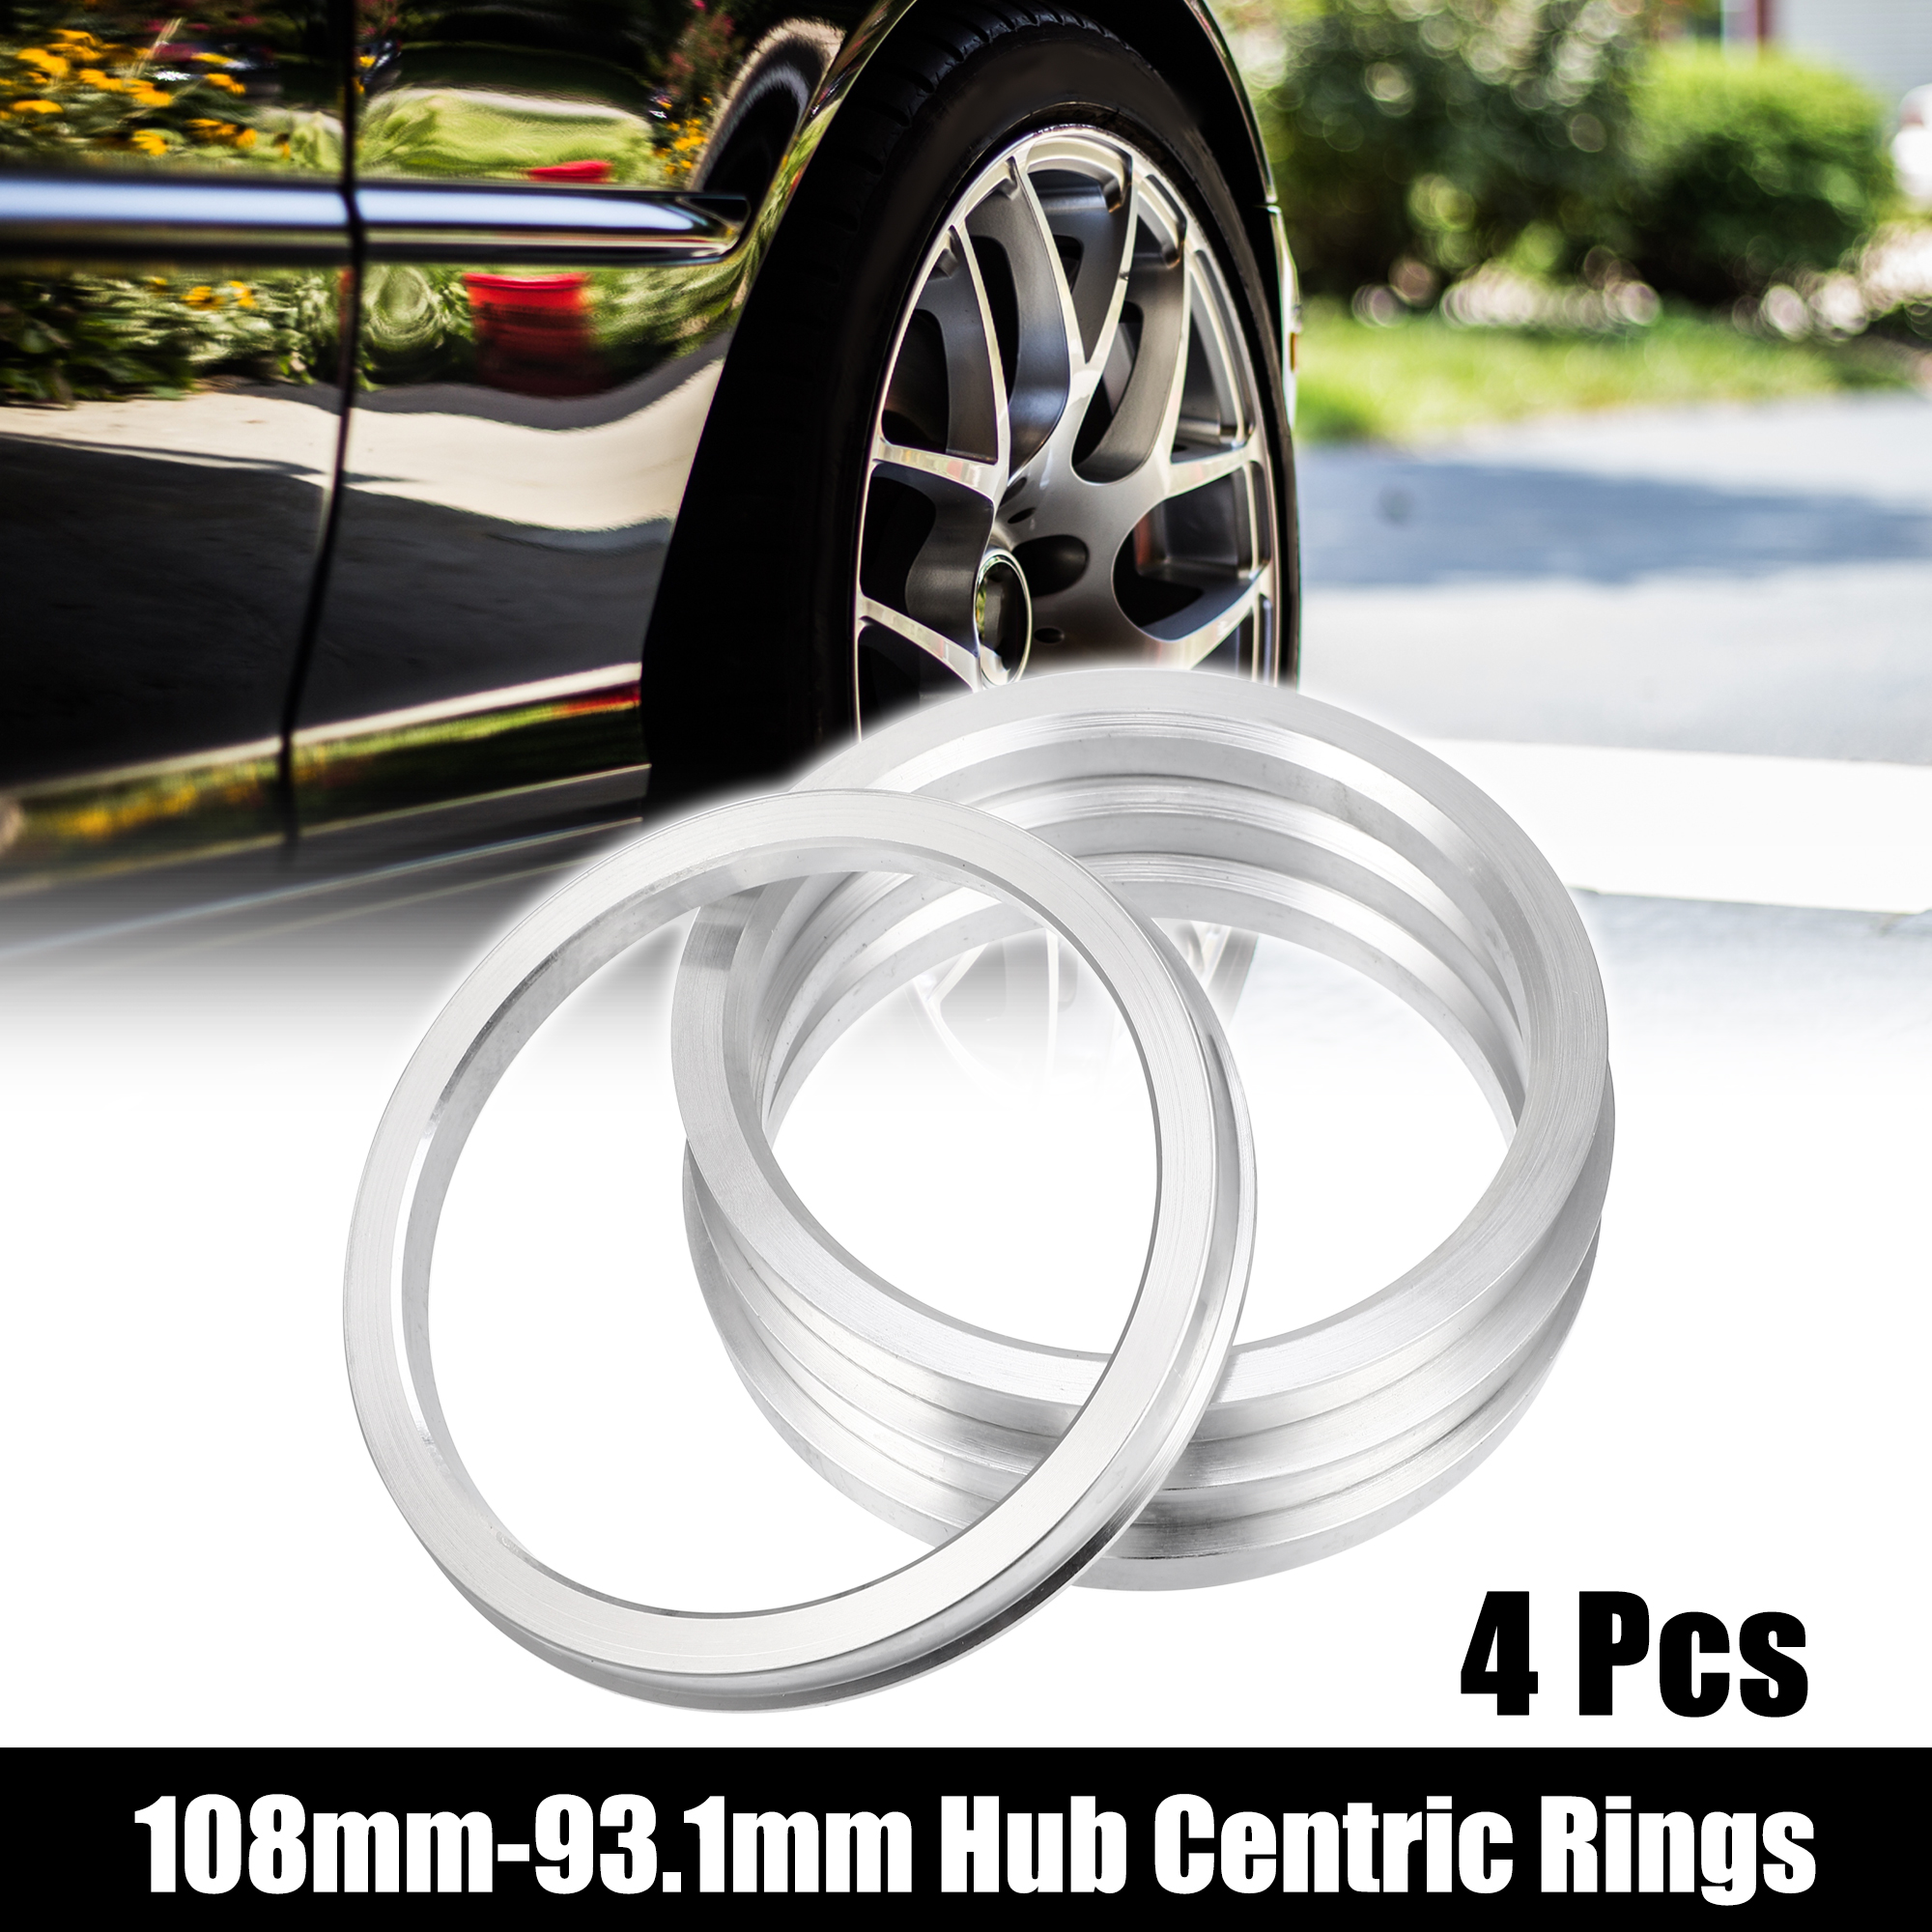 Unique Bargains 4 Pcs OD 108mm to ID 93.1mm Auto Hub Centric Rings Wheel Bore Center Spacer